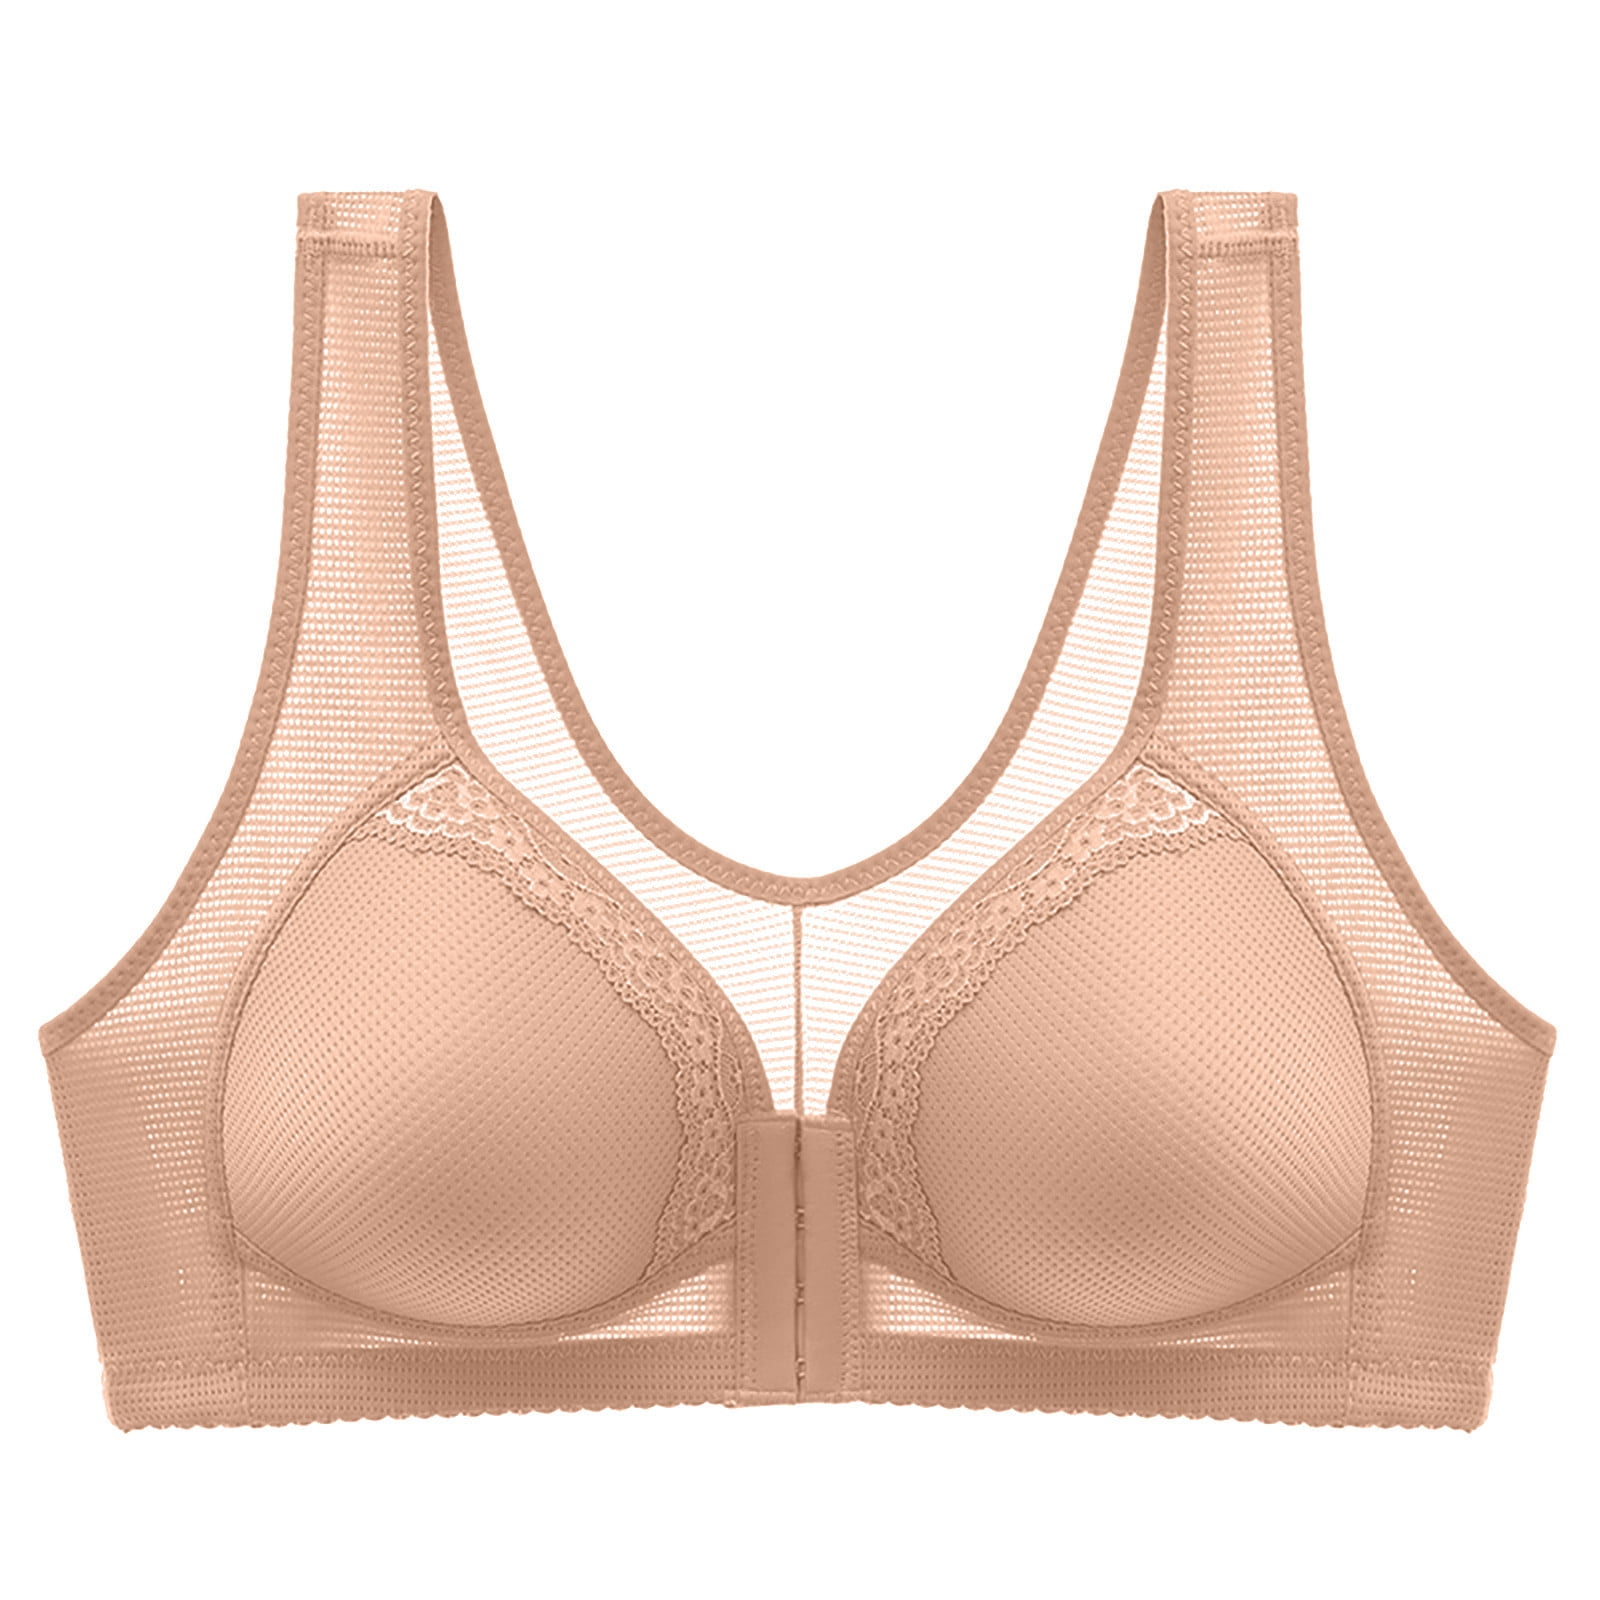 Underwire and Wireless Bras: What are the Pros and Cons?